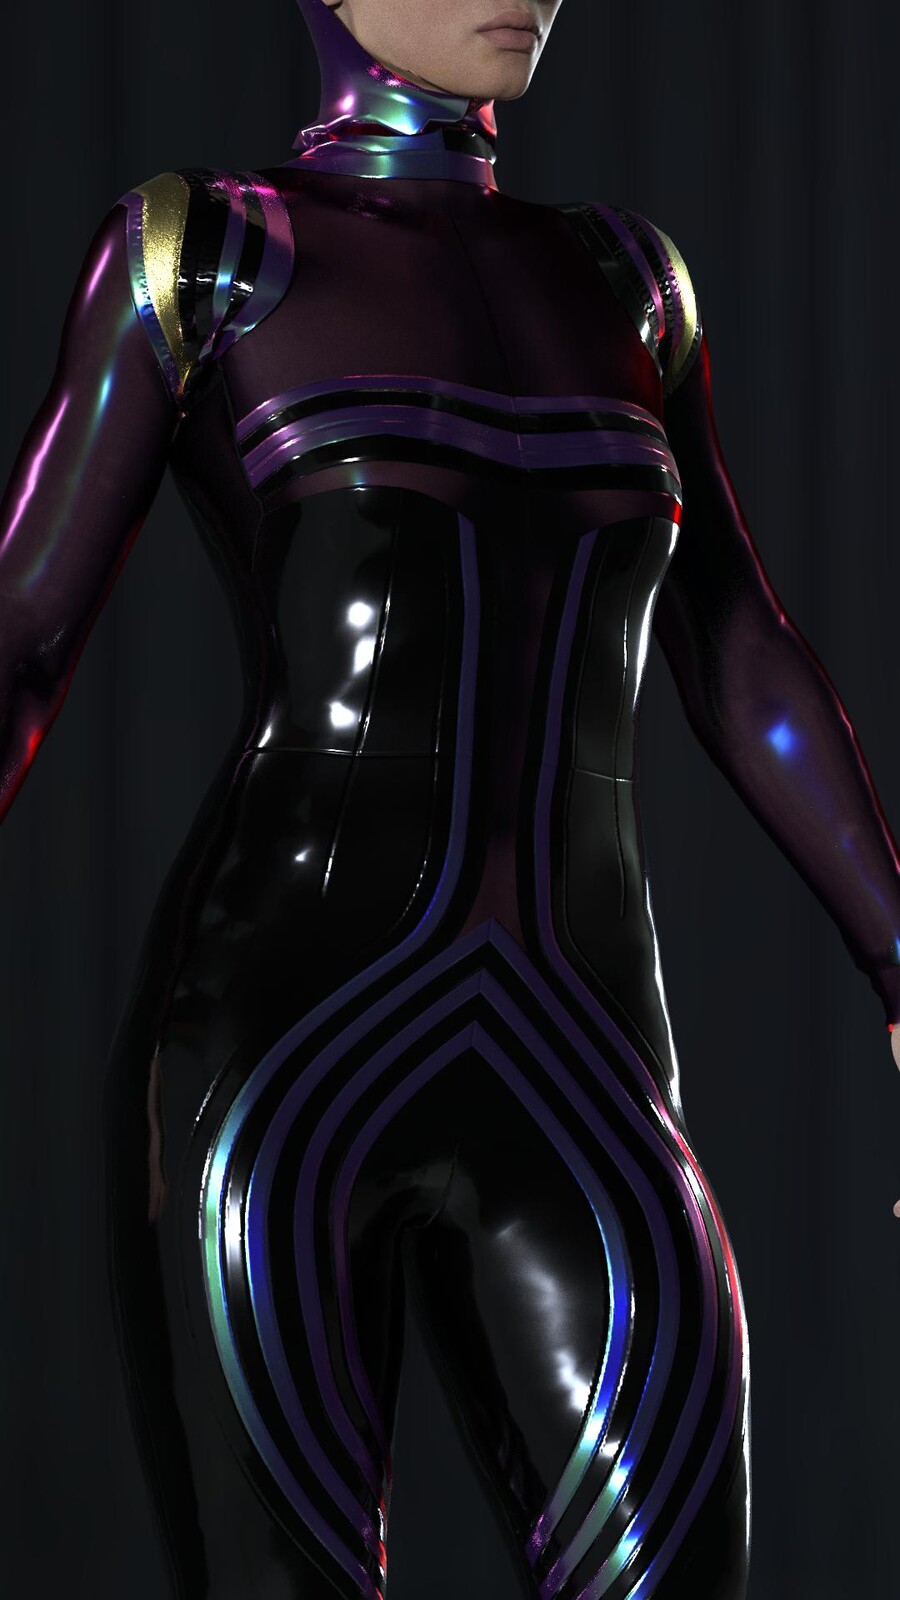 Catsuit spacesuit designed and rendered in Clo3D by Suzana Pezo Sommerfeld